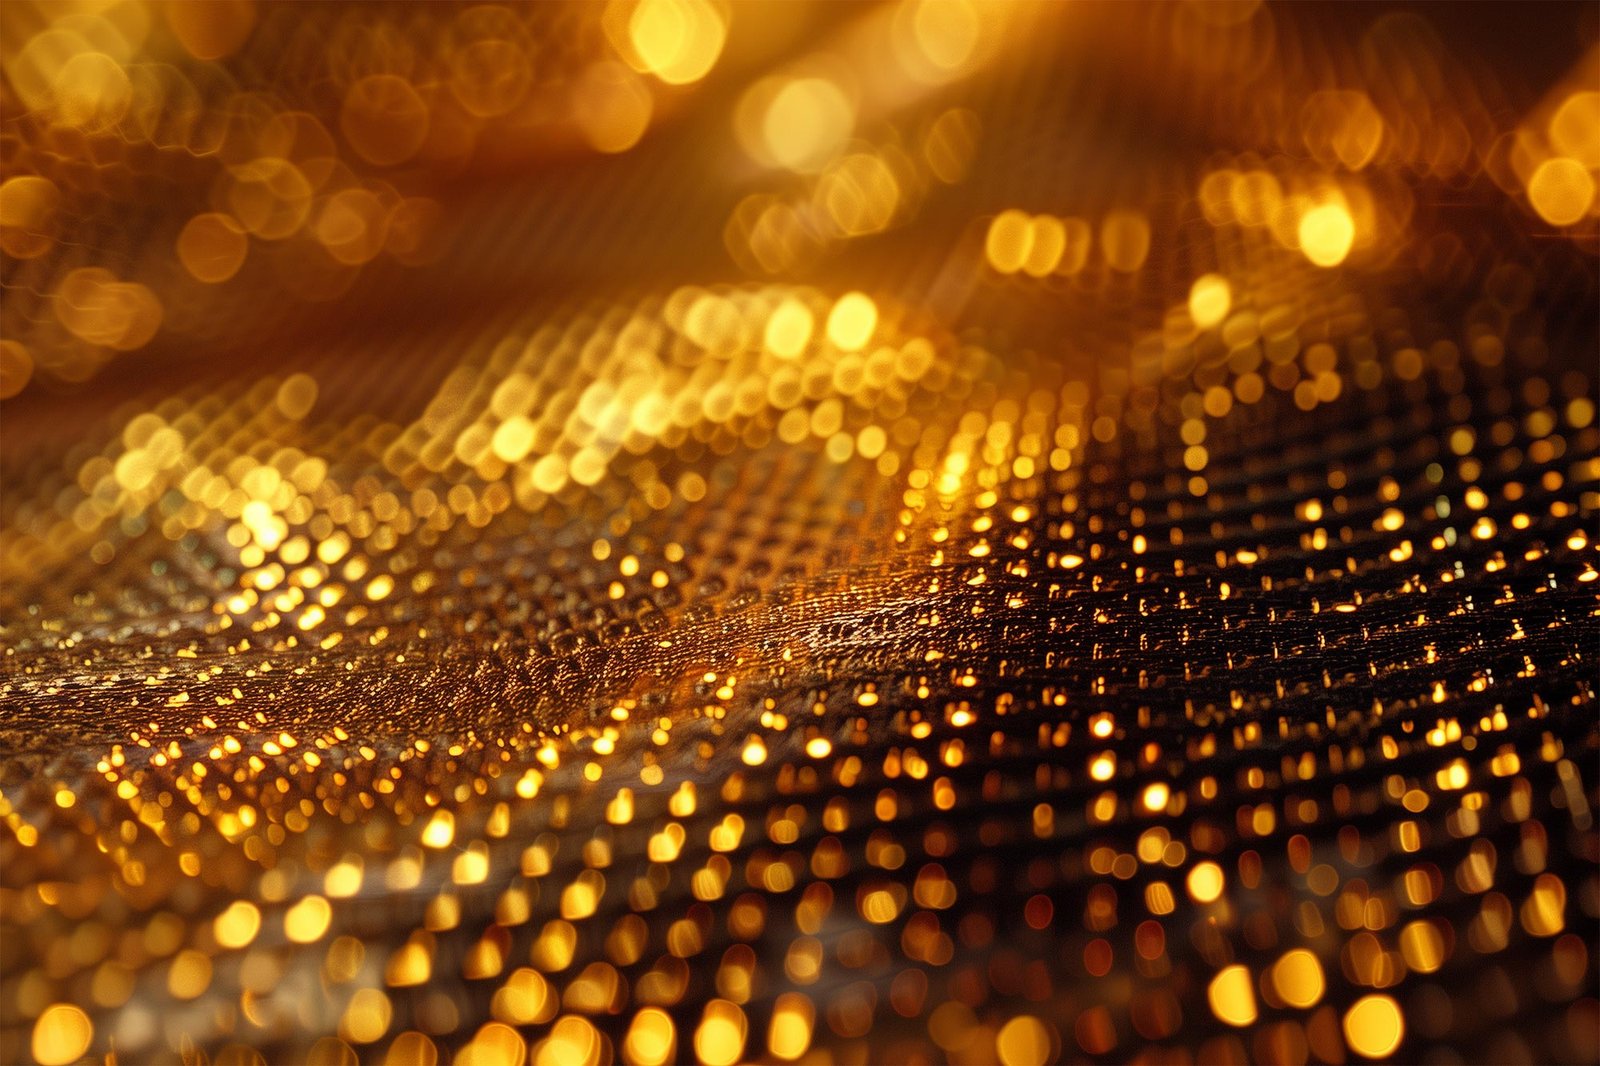 Researchers Develop “Goldene” – A New Form of Ultra-Thin Gold With Semiconductor Properties